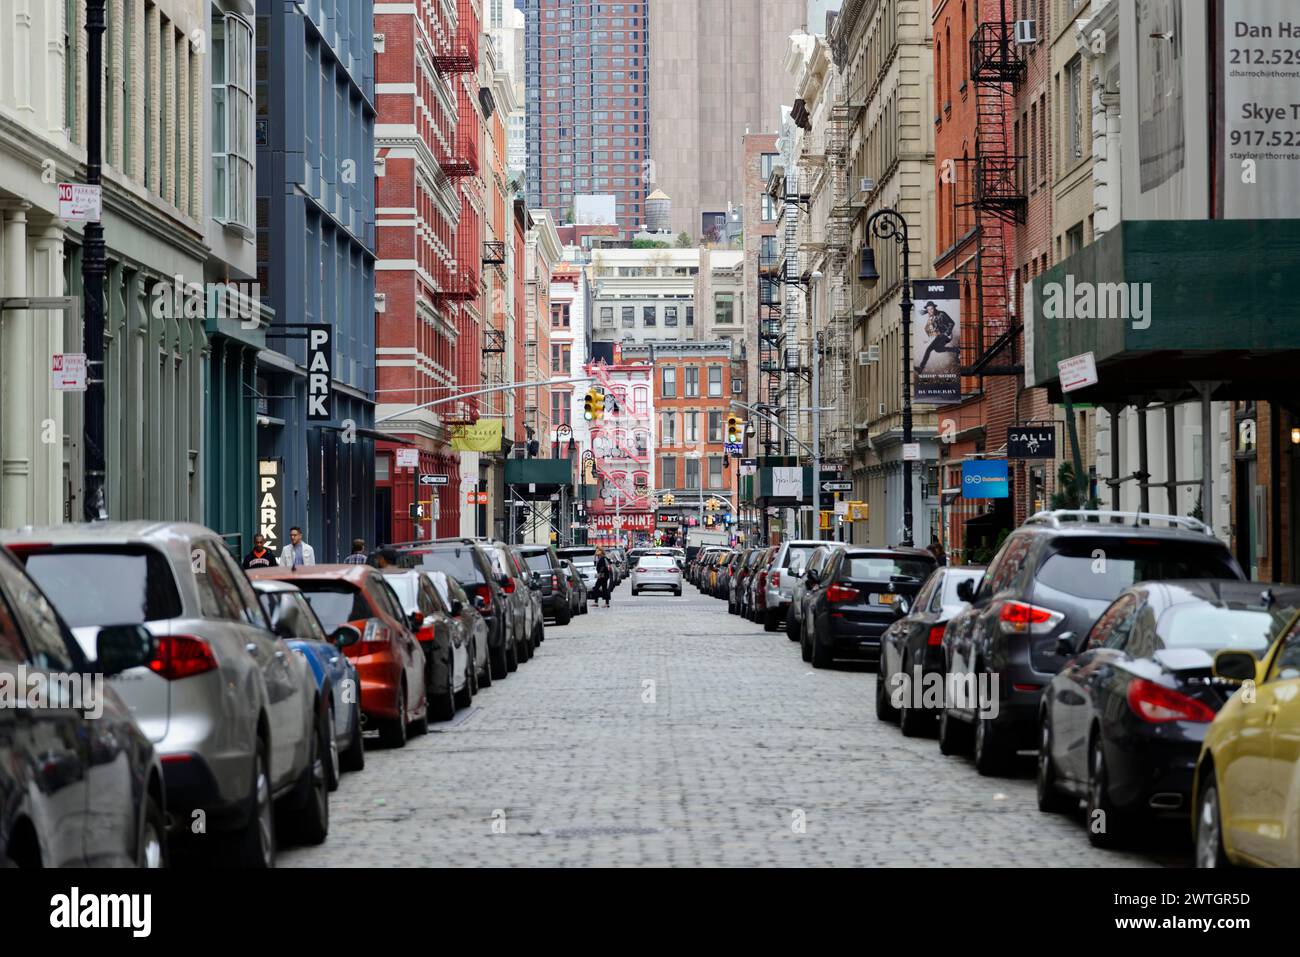 A busy city street with parked cars and historic buildings, Manhattan, New York City, New York, USA, North America Stock Photo